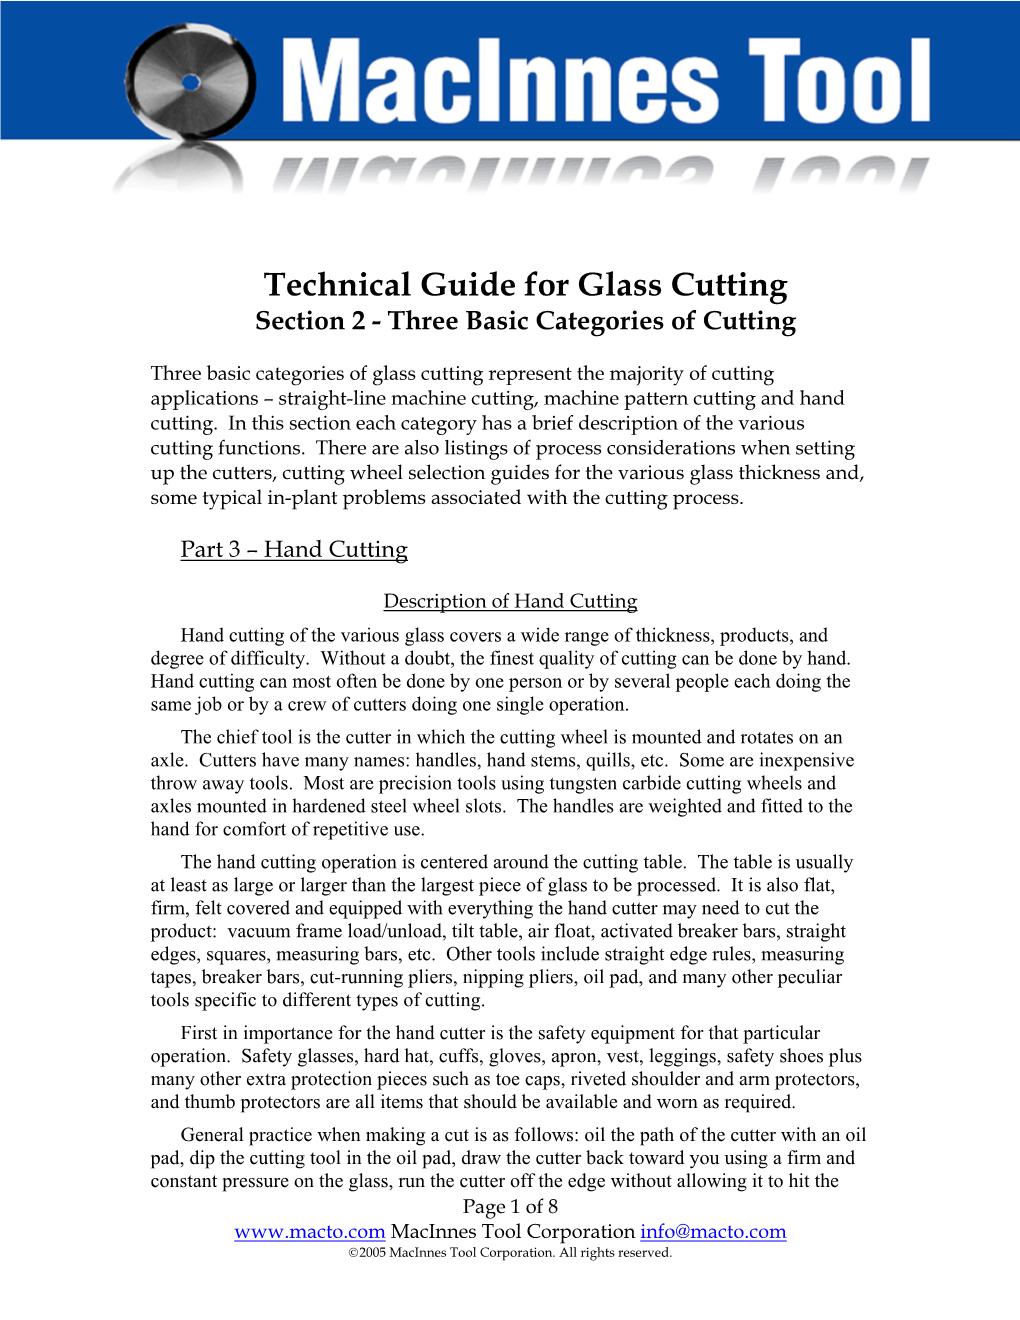 Technical Guide for Glass Cutting Section 2 - Three Basic Categories of Cutting